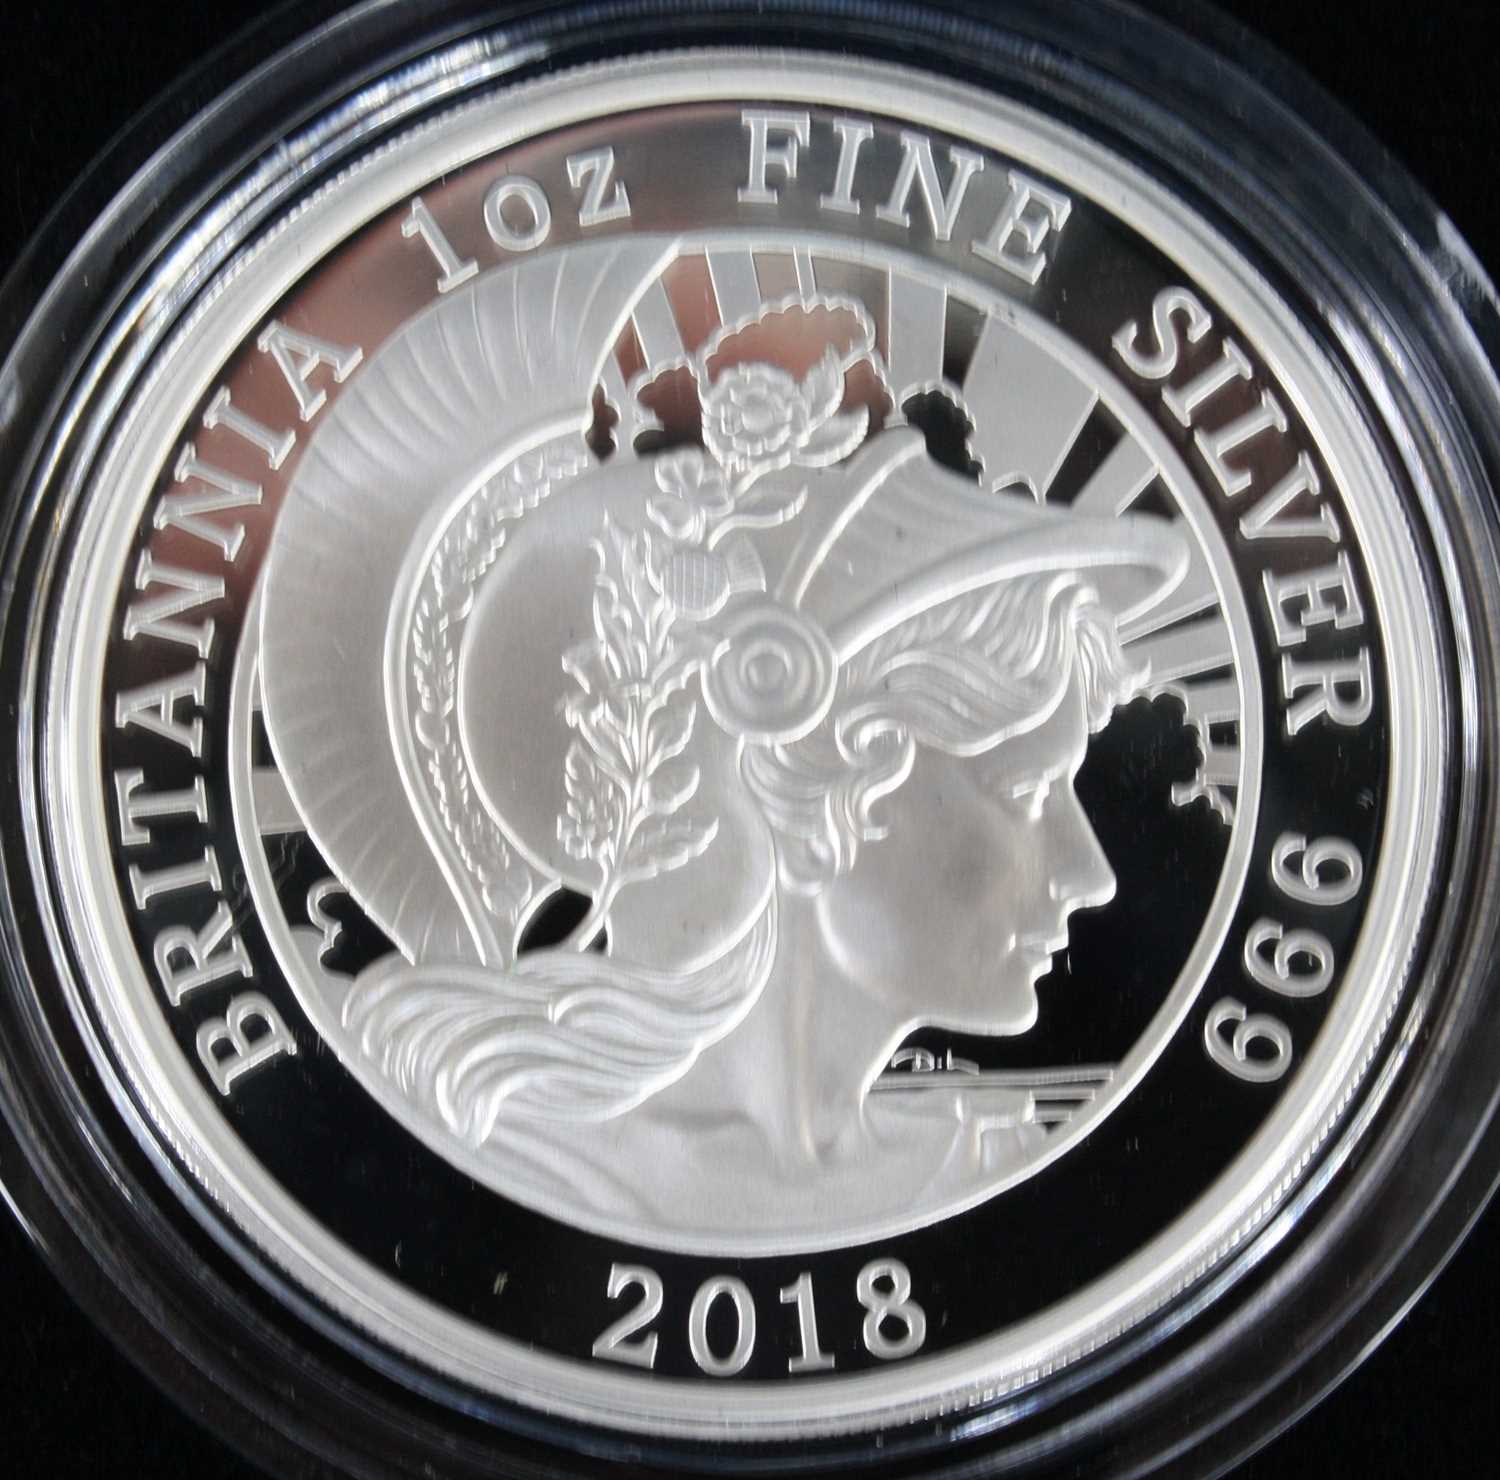 United Kingdom, The Royal Mint, Spirit of a Nation, The Britannia 2018 Six-Coin Silver Proof Set, - Image 2 of 2